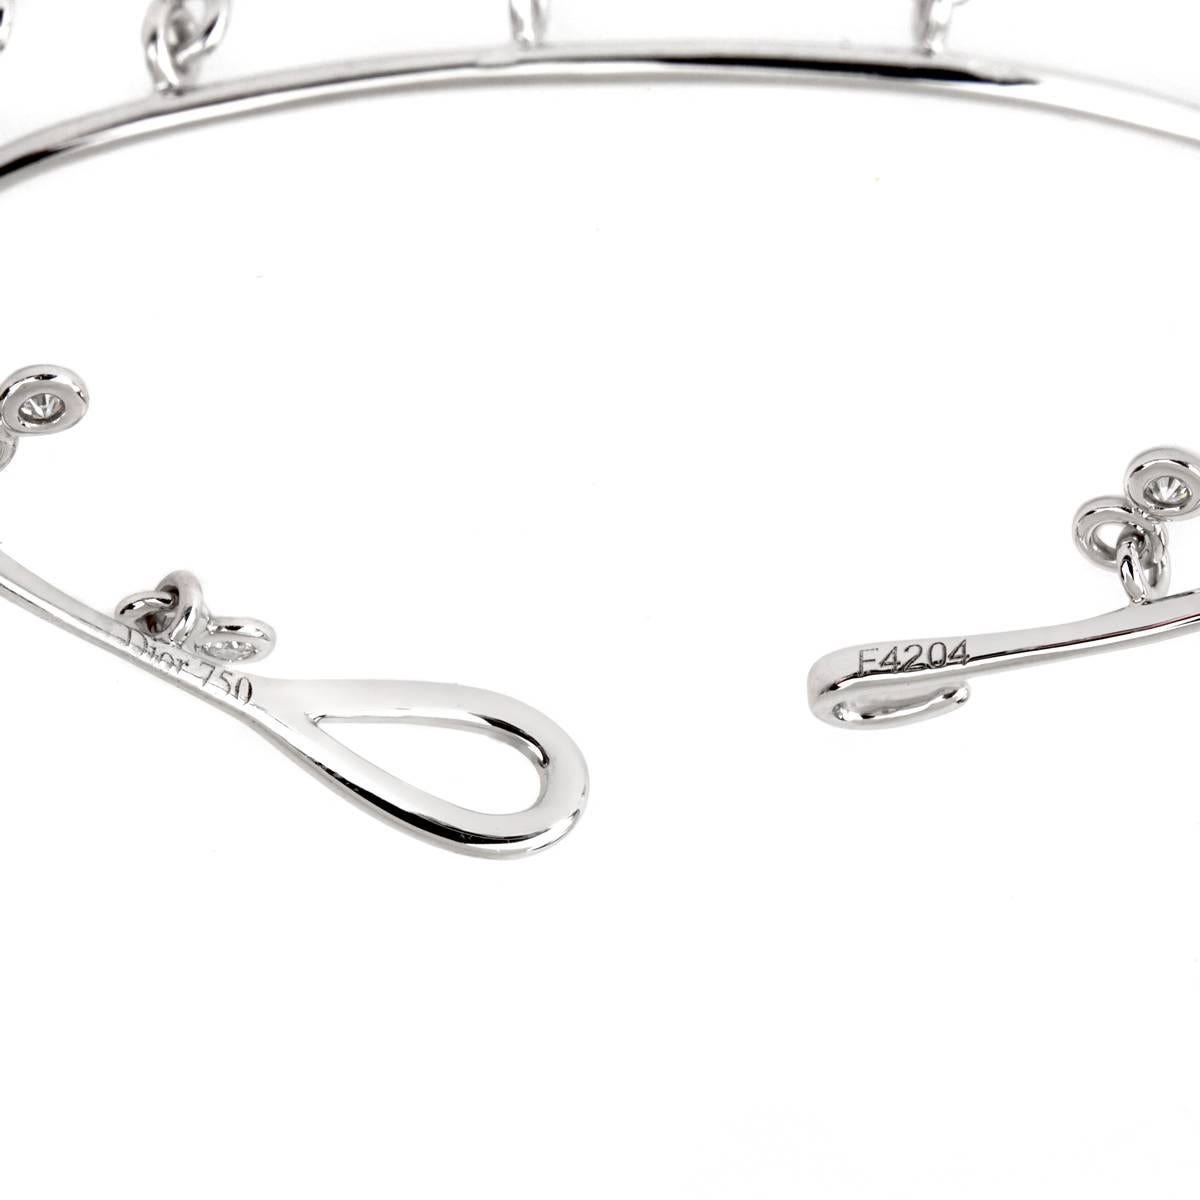 A chic Dior bangle bracelet featuring 12 of the finest Dior round brilliant cut diamonds set in bezels freely floating in 18k white gold.

Size: Medium 

Sku:858